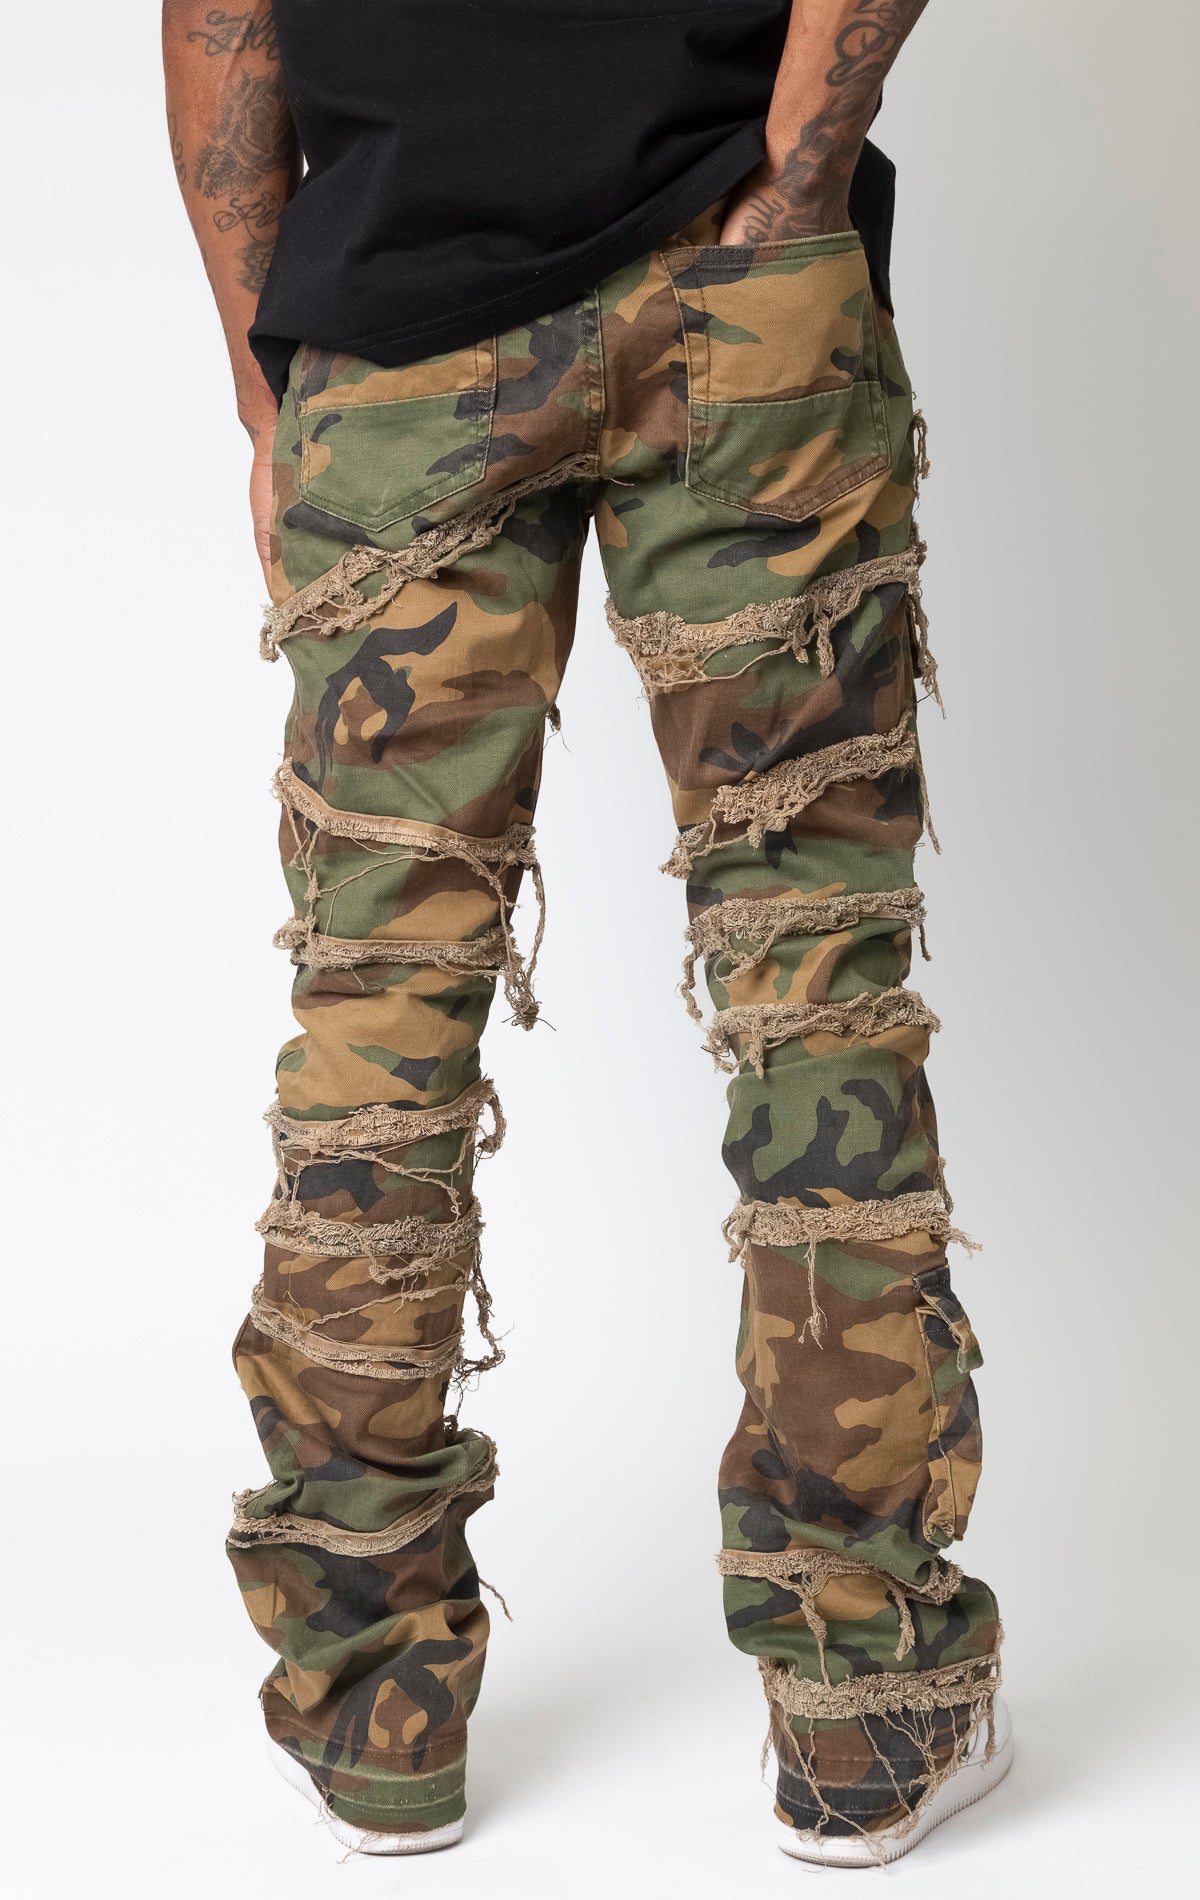 Camo pants with premium stretch, 2% spandex, and premium leather waist label, featuring a button fly